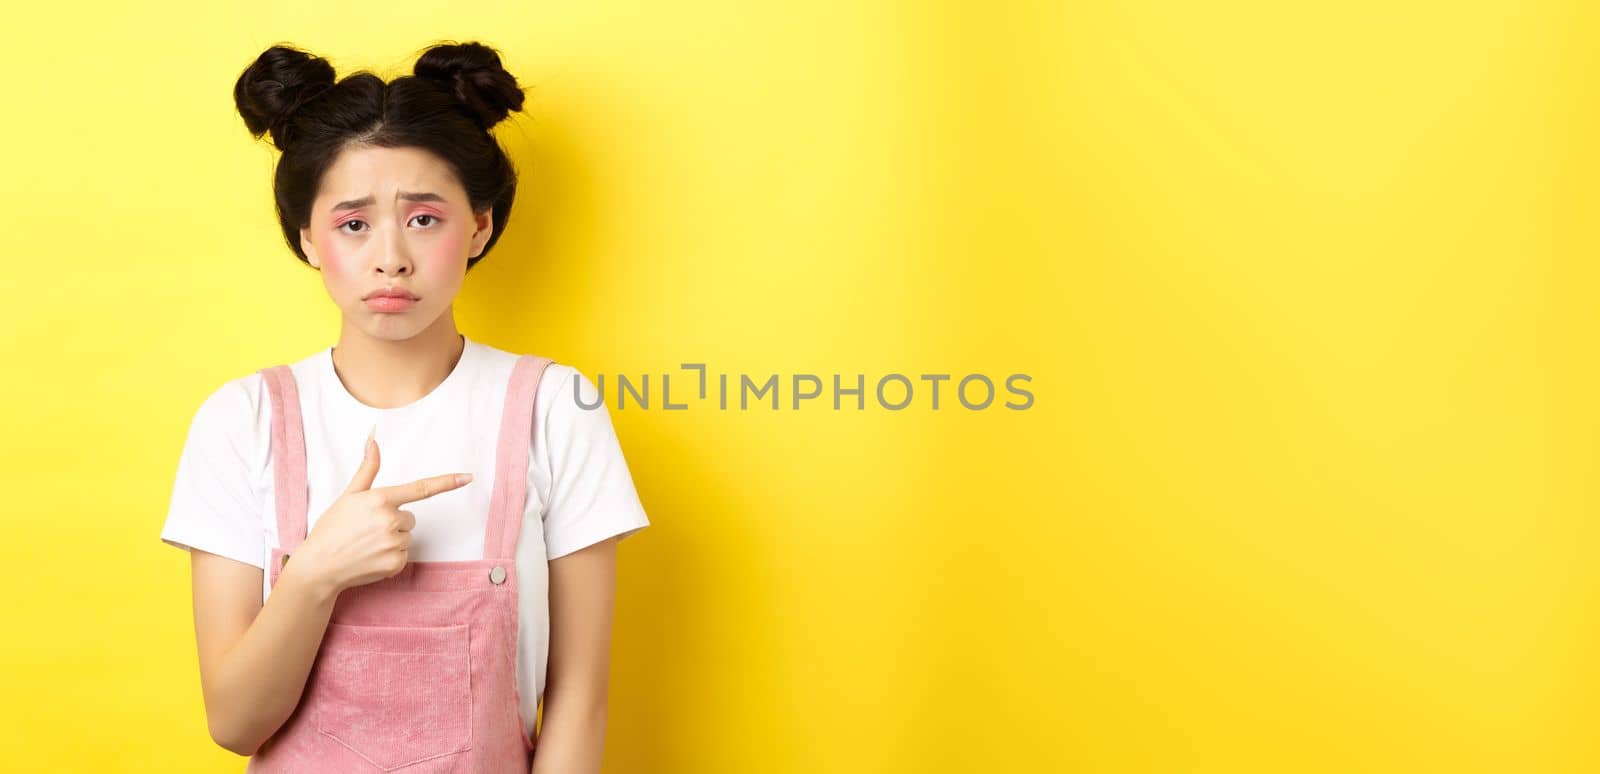 Sad and disappointed asian girl frowning, feel unfair, pointing finger right at bad thing, complaining on something upsetting, yellow background.